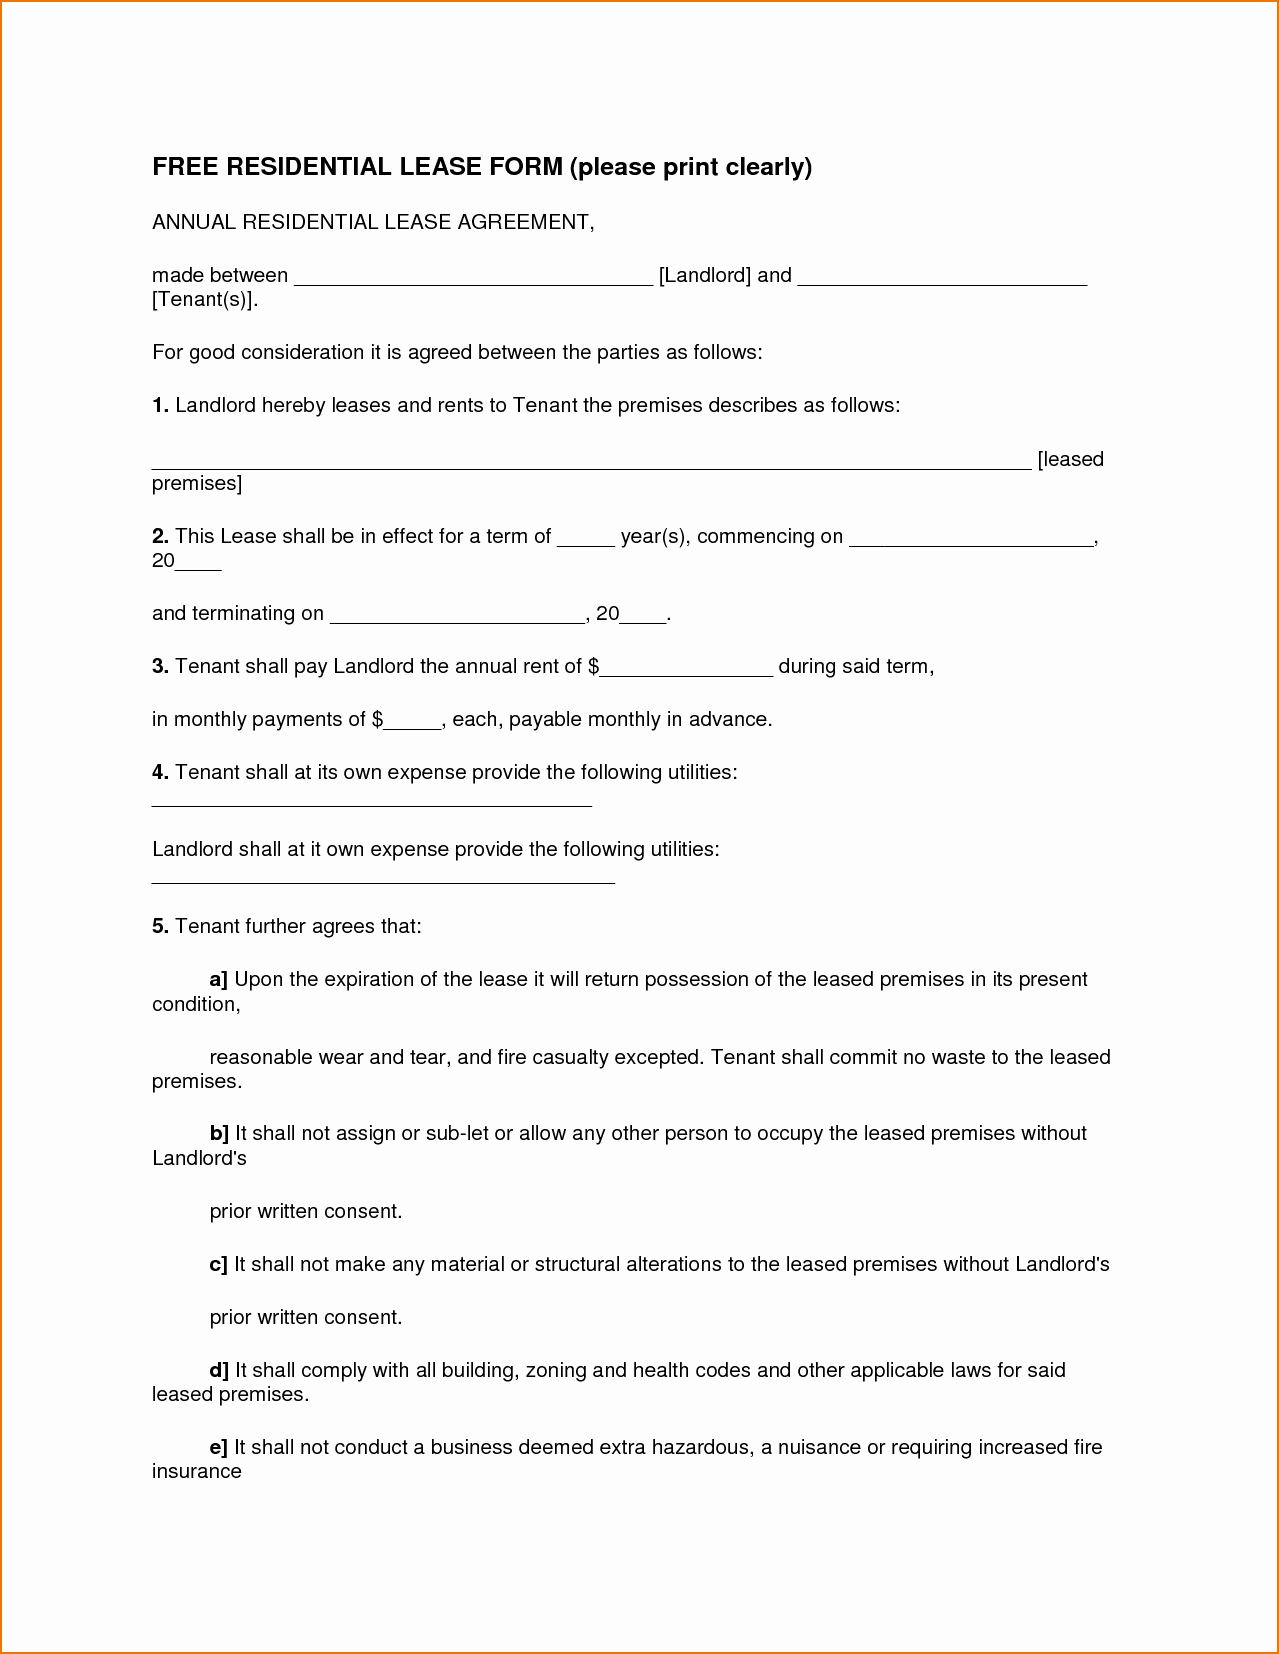 6 Free Lease Agreement forms to Print